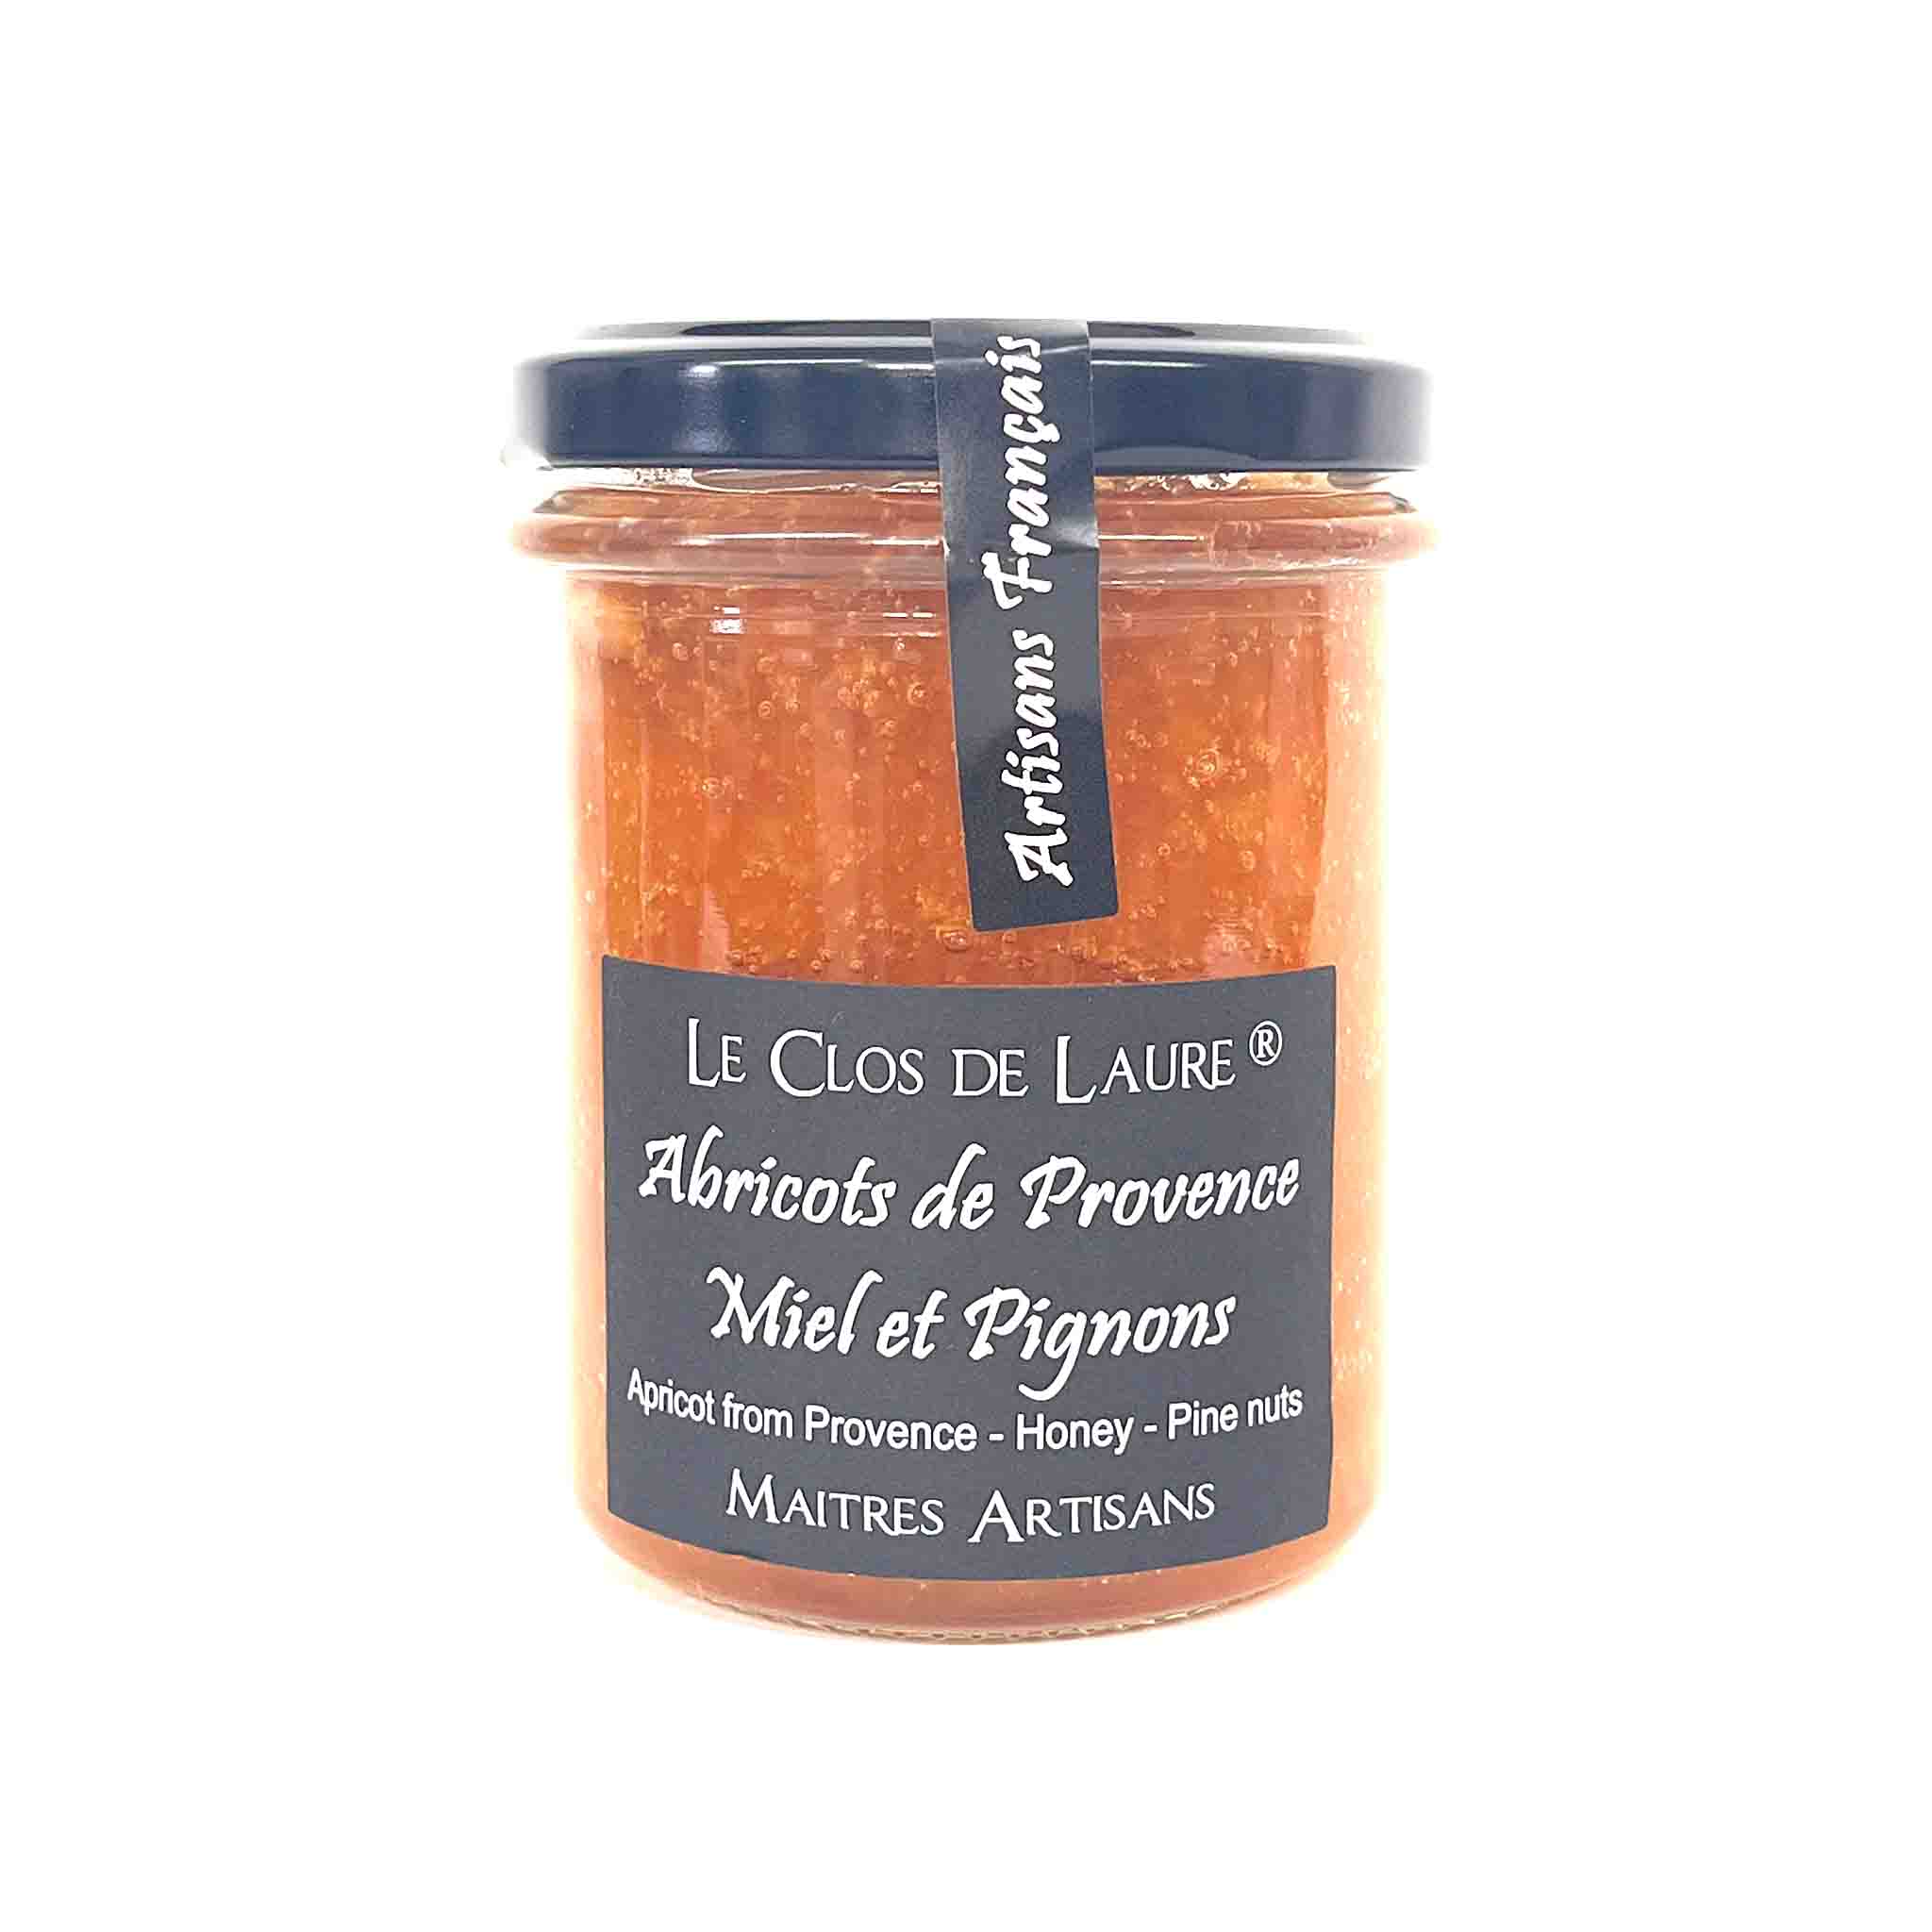 LE CLOS DE LAURE APRICOT JAM FROM PROVENCE WITH PINE NUTS 7.76oz